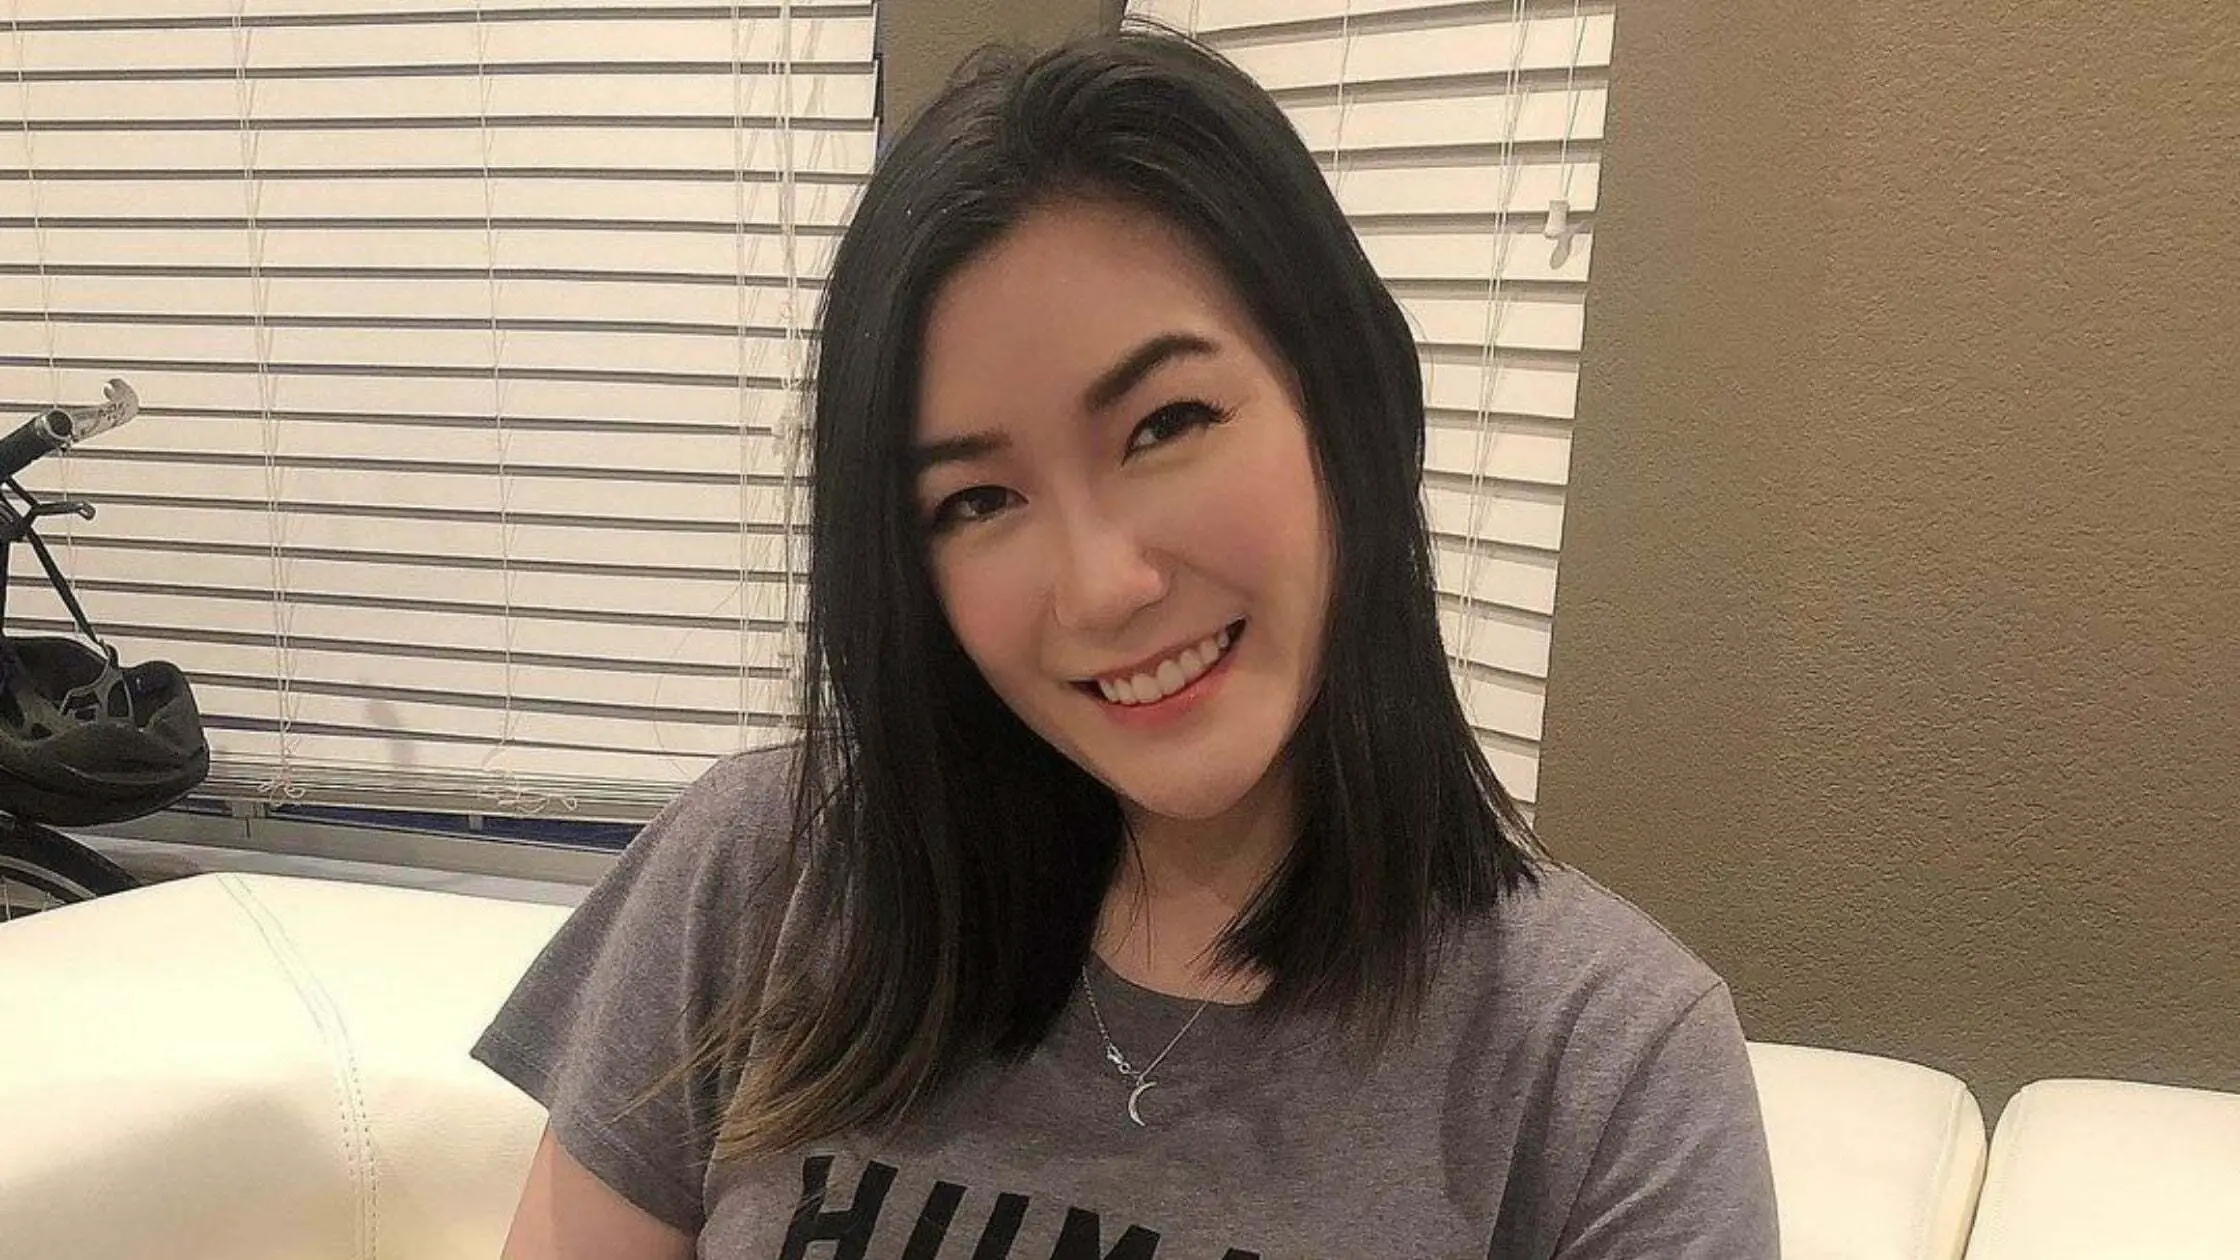 hafu-is-quitting-among-us-it-is-getting-boring-she-says